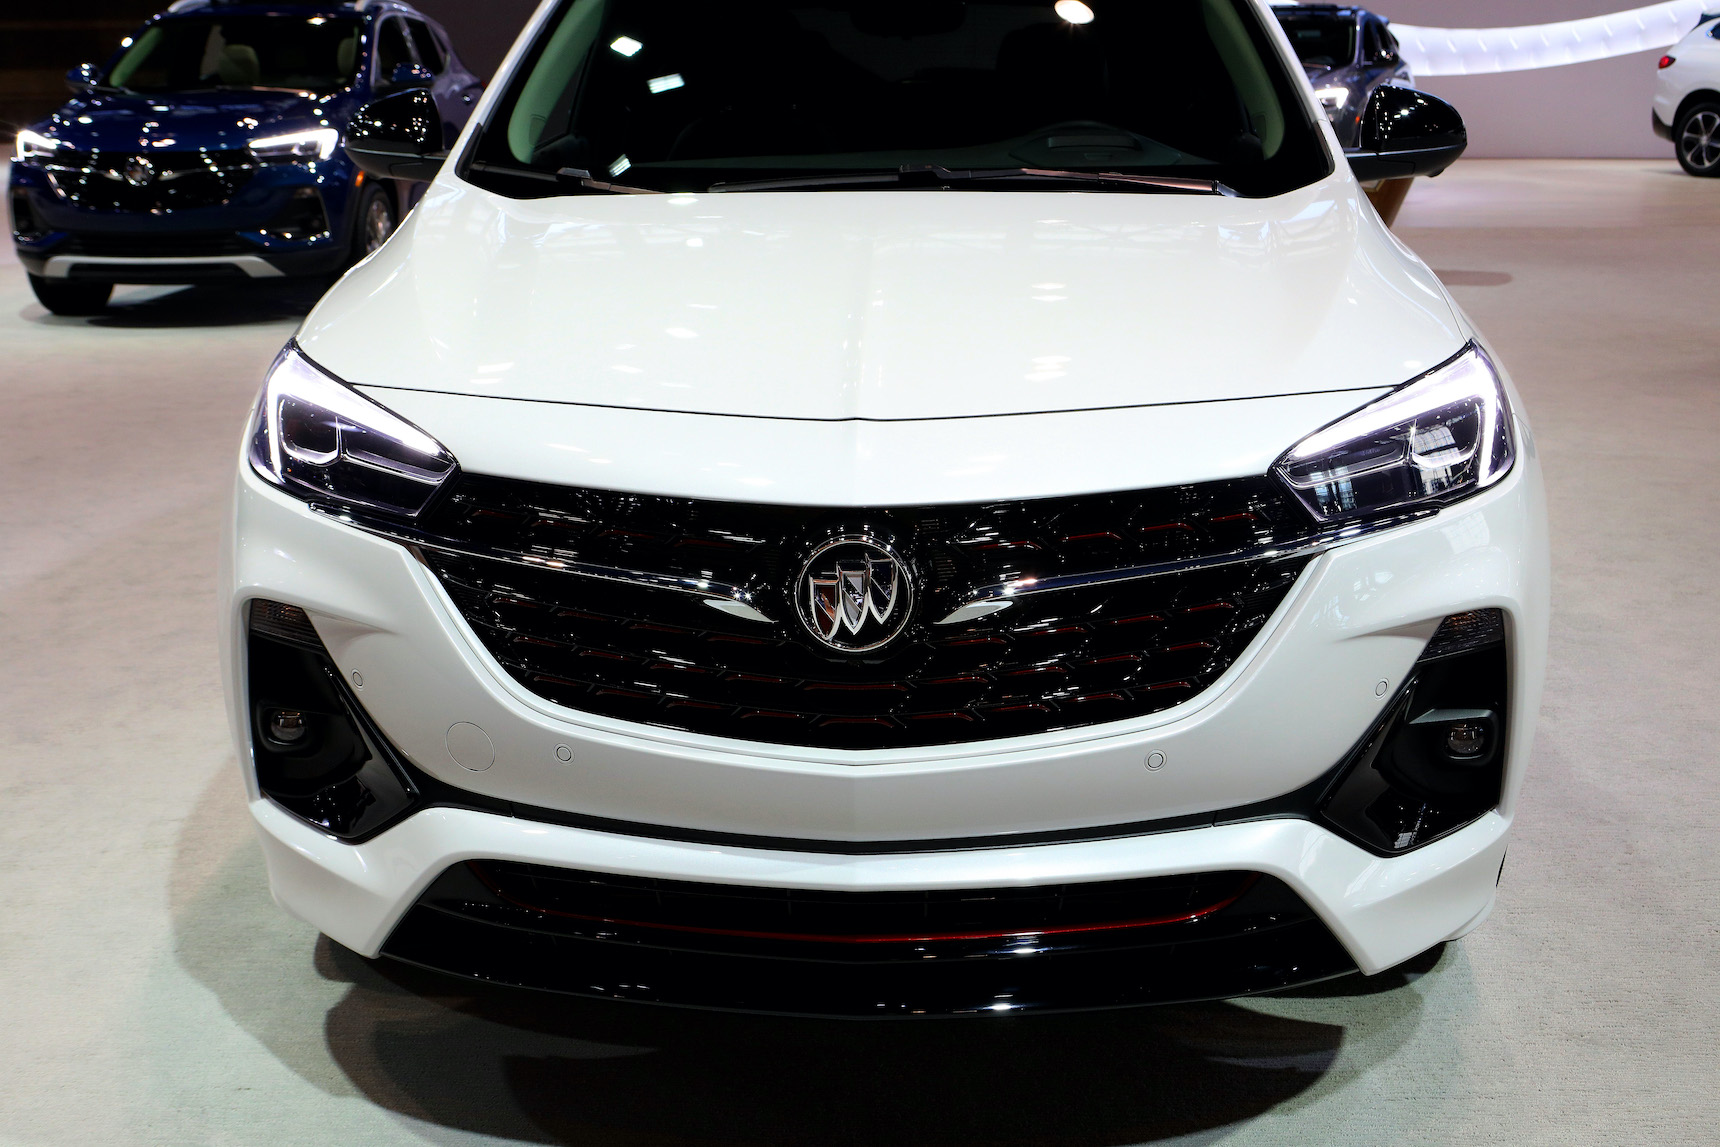 2020 Buick Encore GX, rival to the Volvo XC40, on display at the 112th Annual Chicago Auto Show